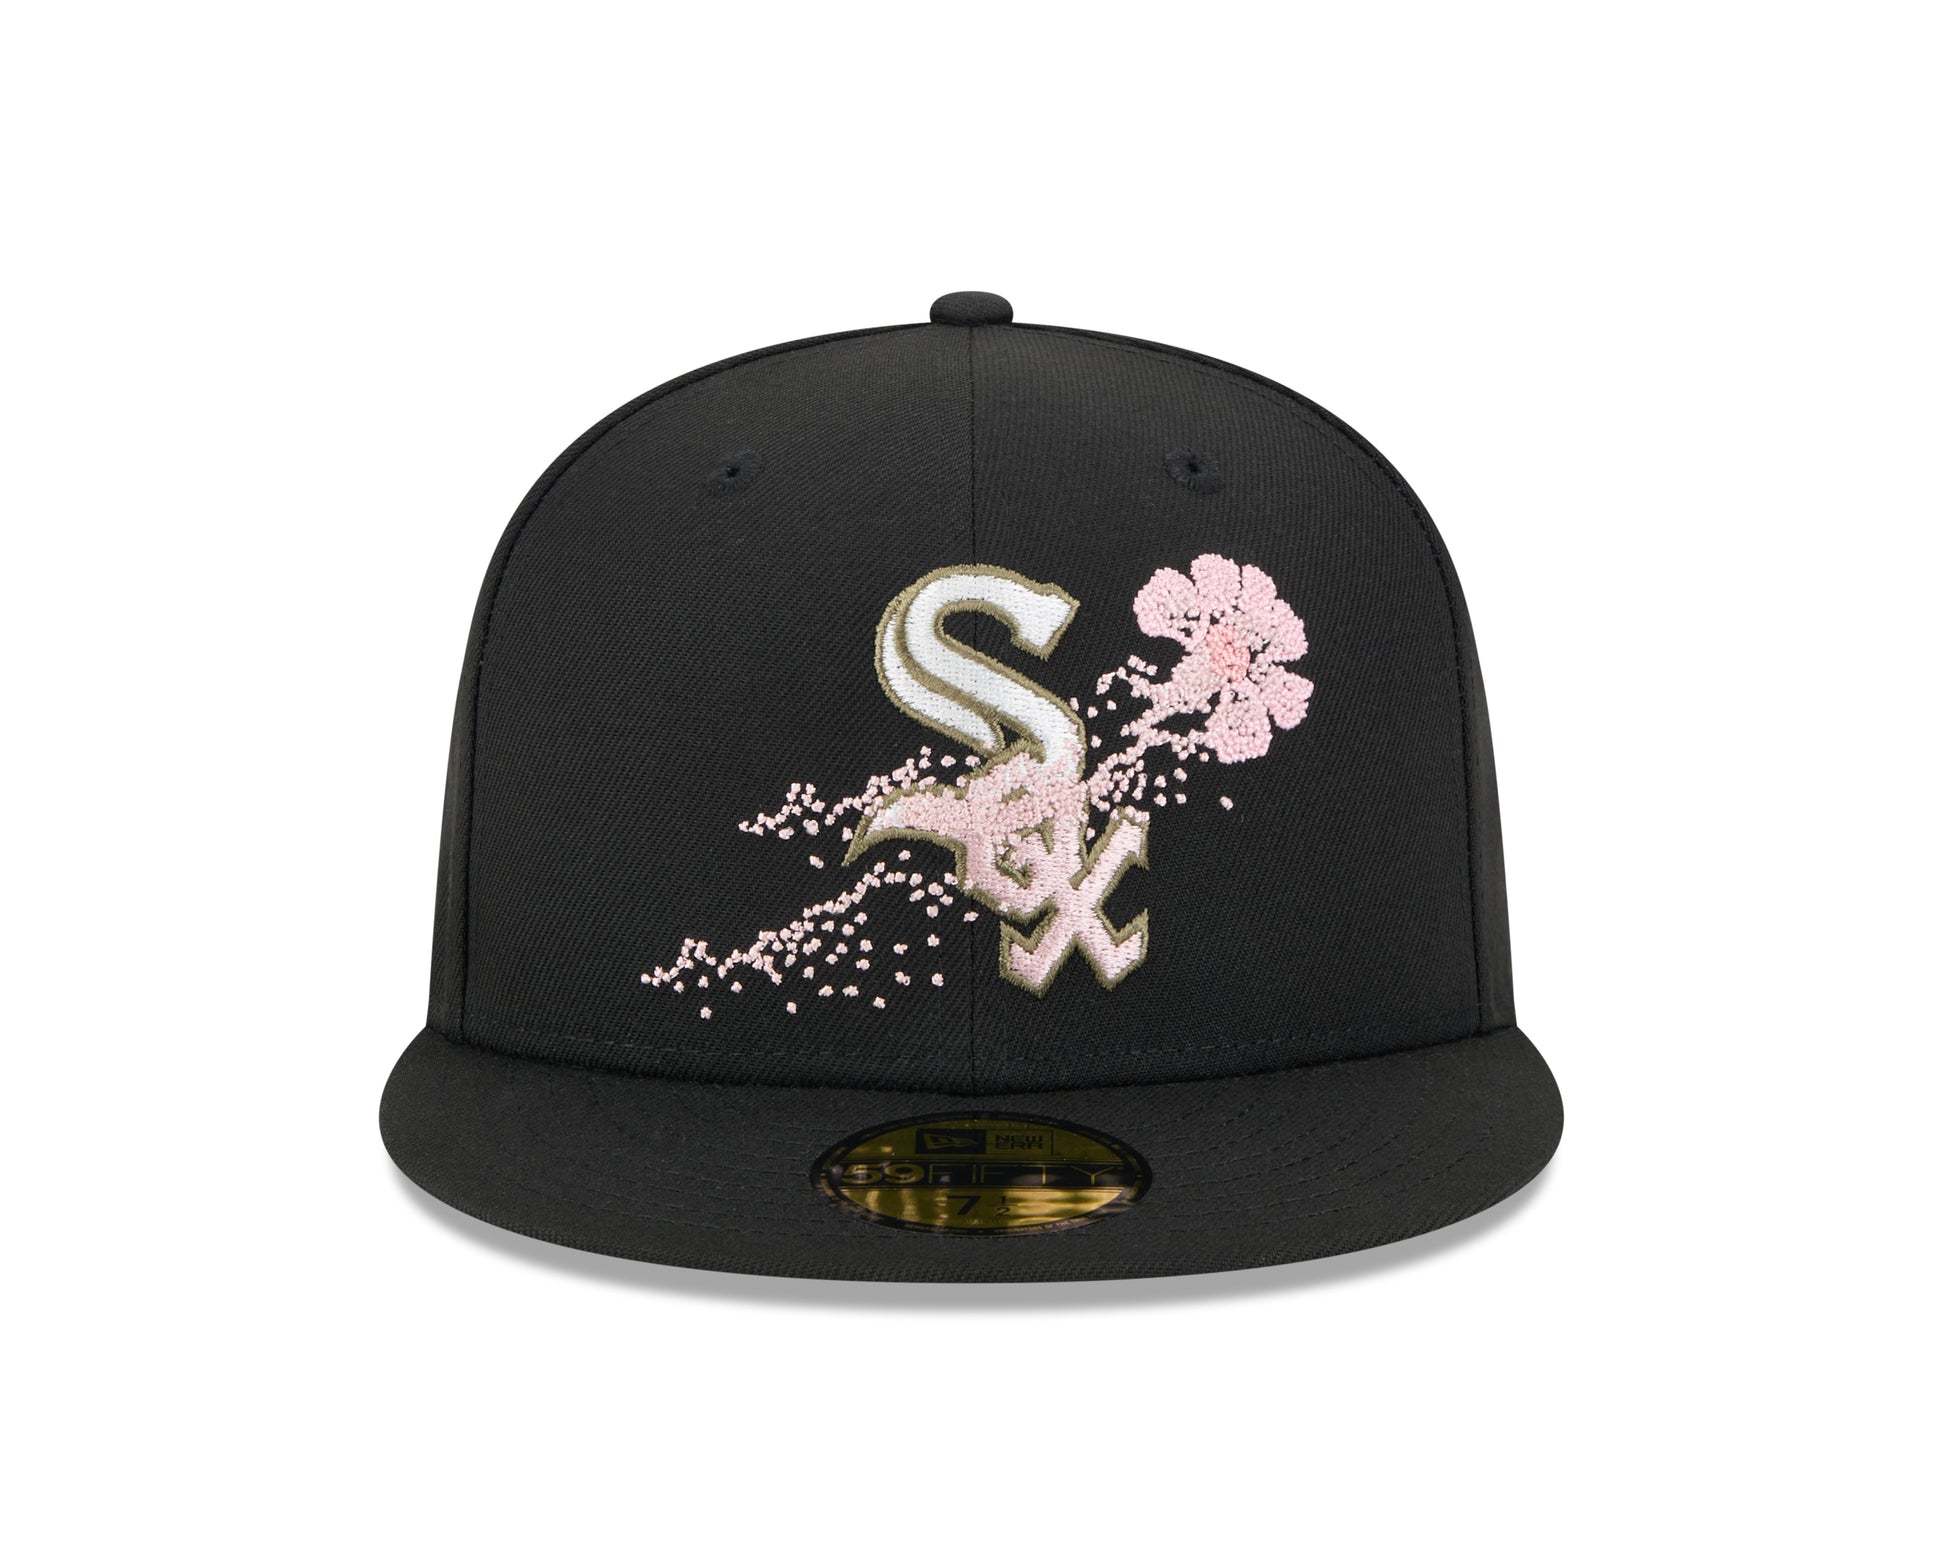 New Era - 59fifty Fitted Cap - Chicago White Sox - DOTTED FLORAL - Black - Headz Up 